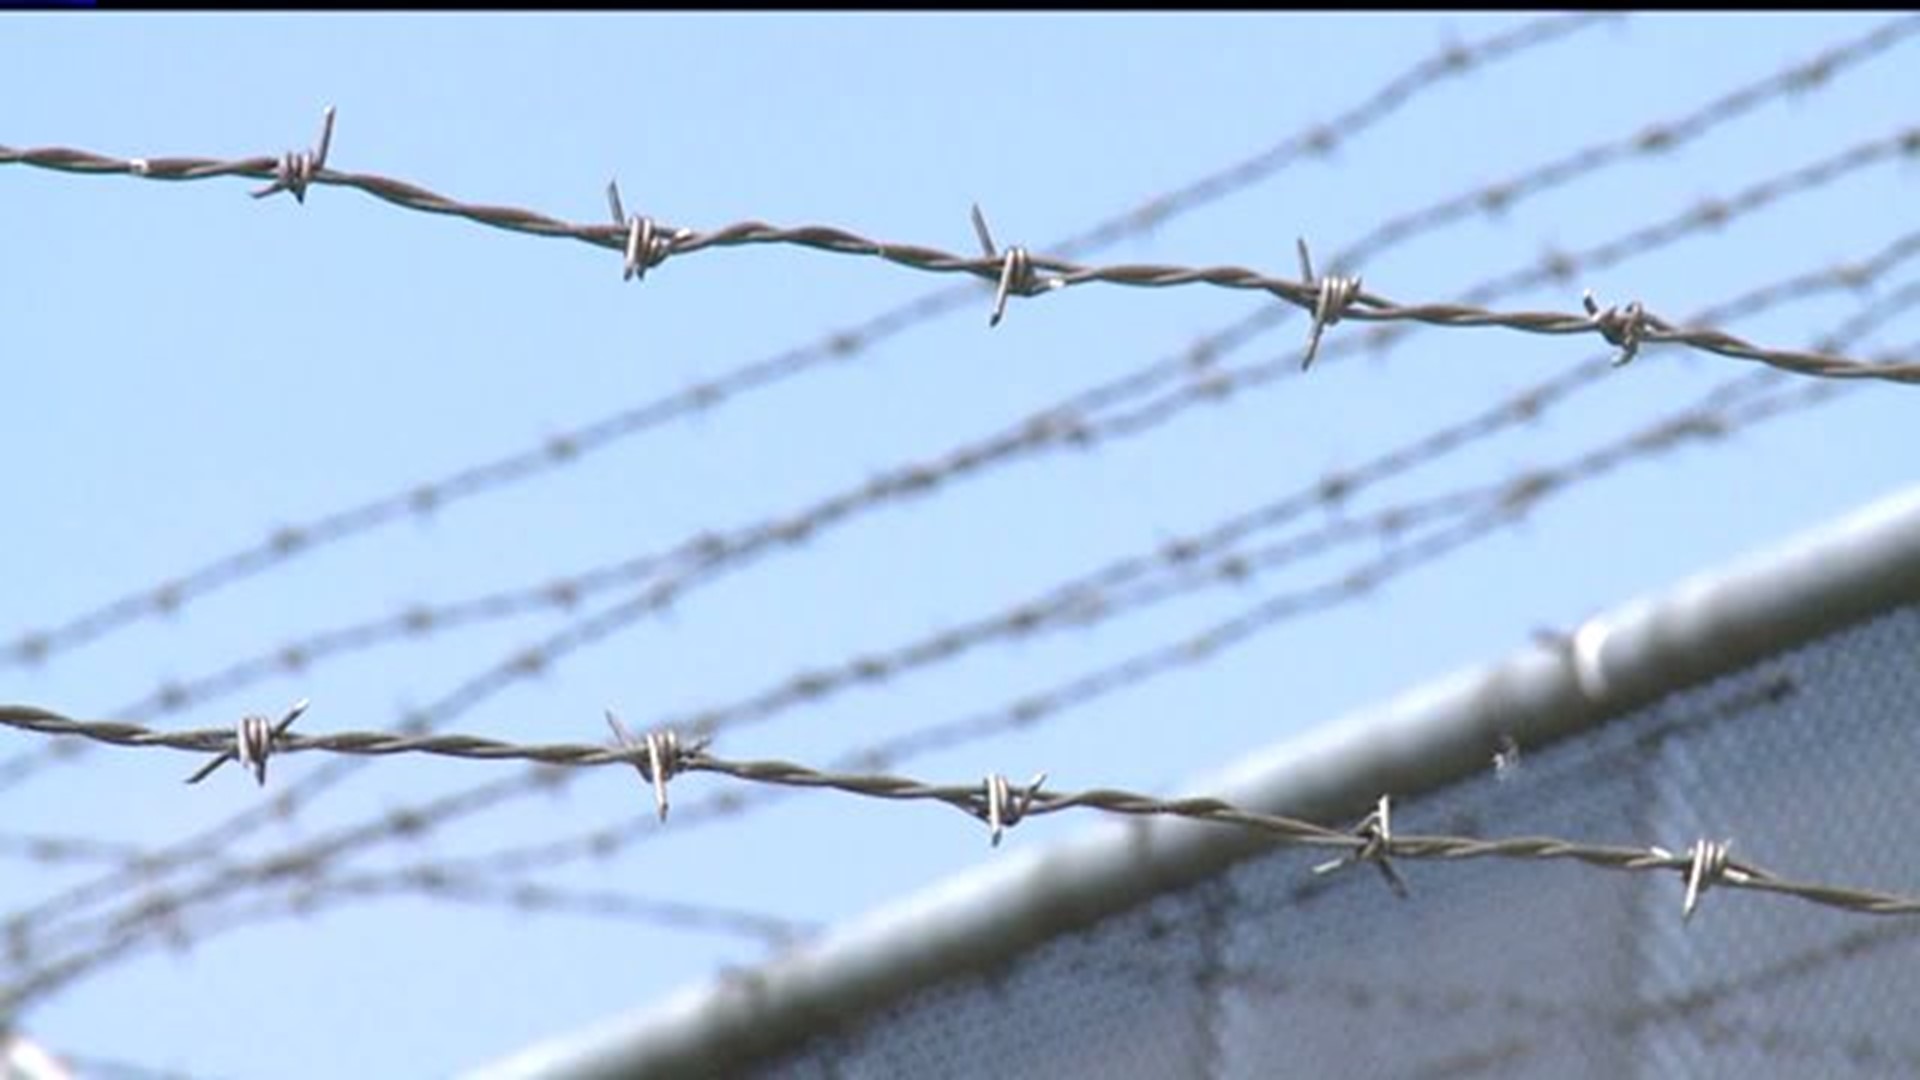 State program offers shot to help inmates curb cravings for heroin & alcohol